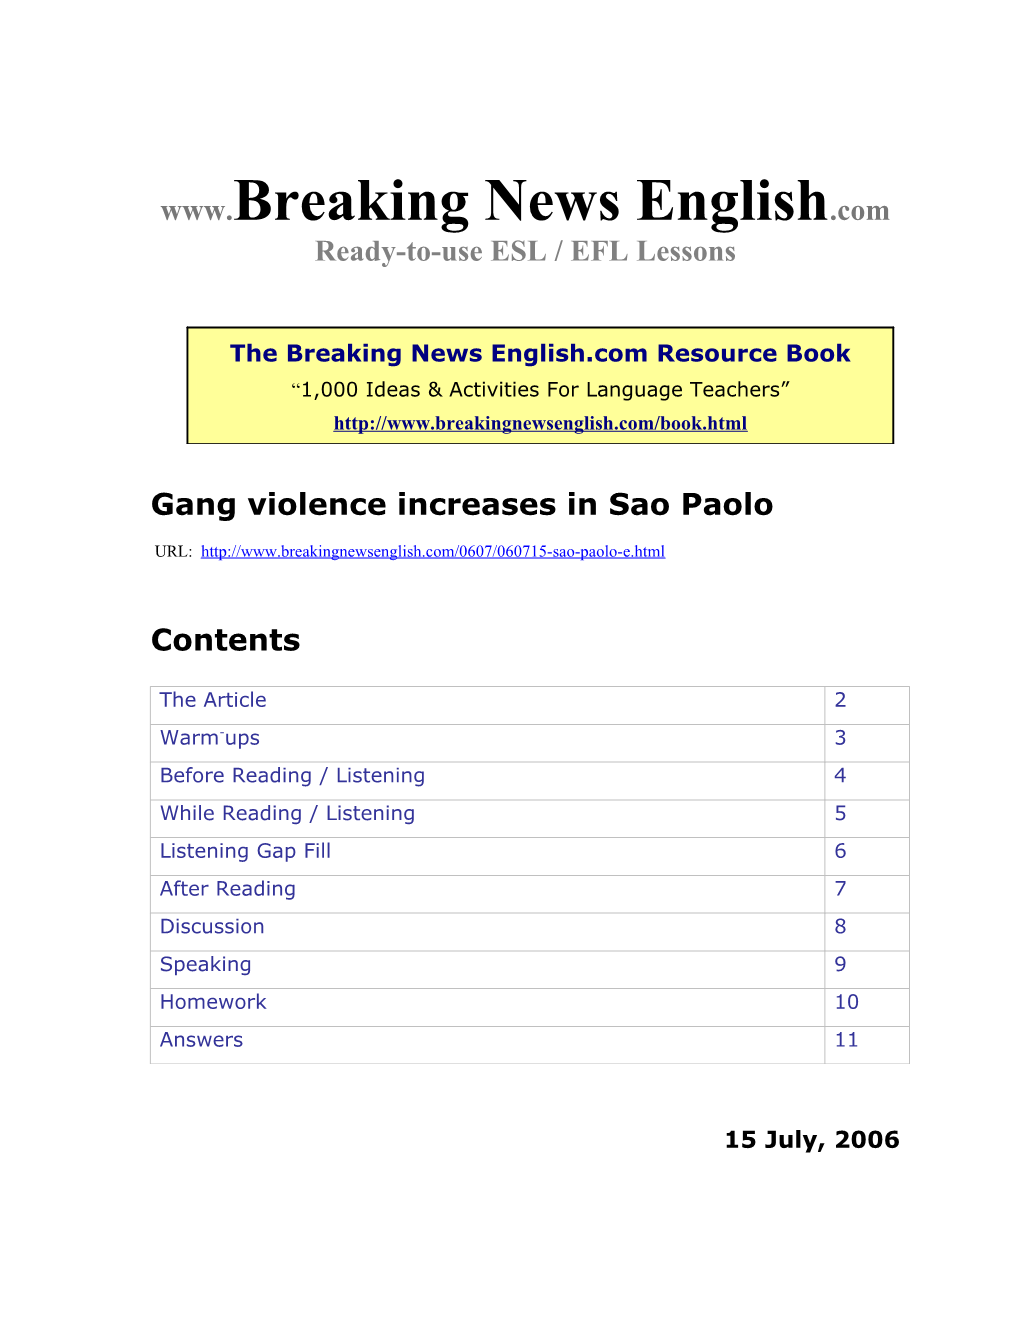 Gang Violence Increases in Sao Paolo